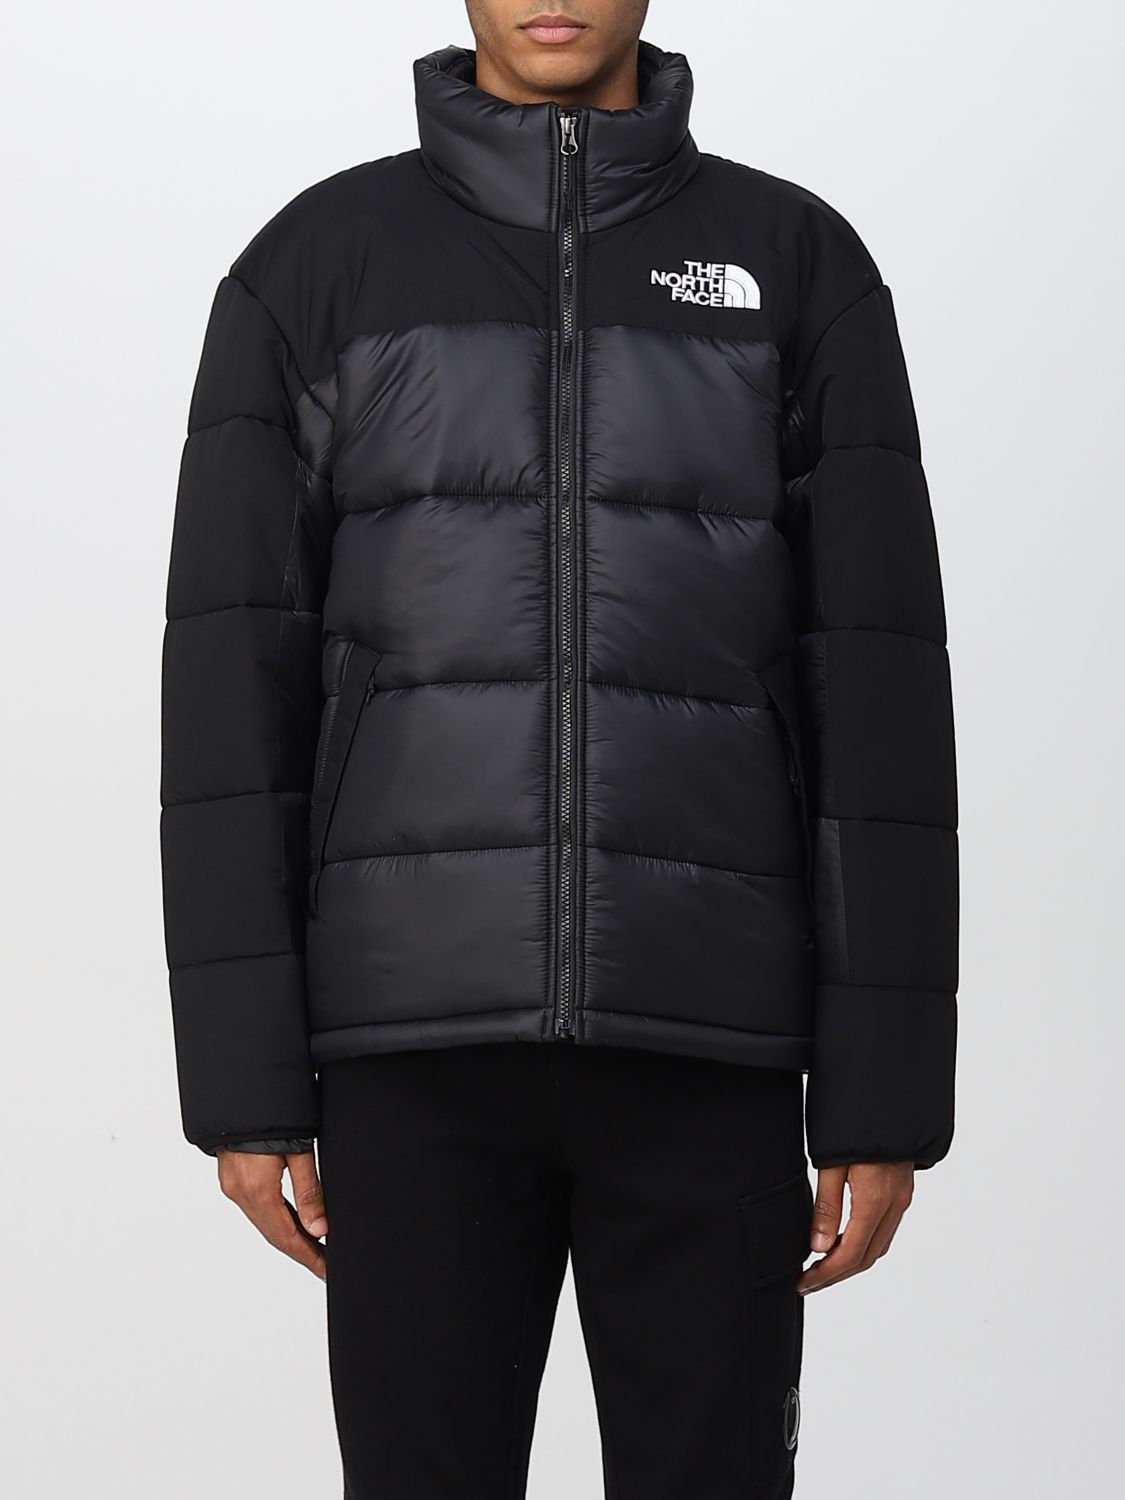 THE NORTH FACE: jacket for man - Black | The North Face jacket NF0A4QYZ ...